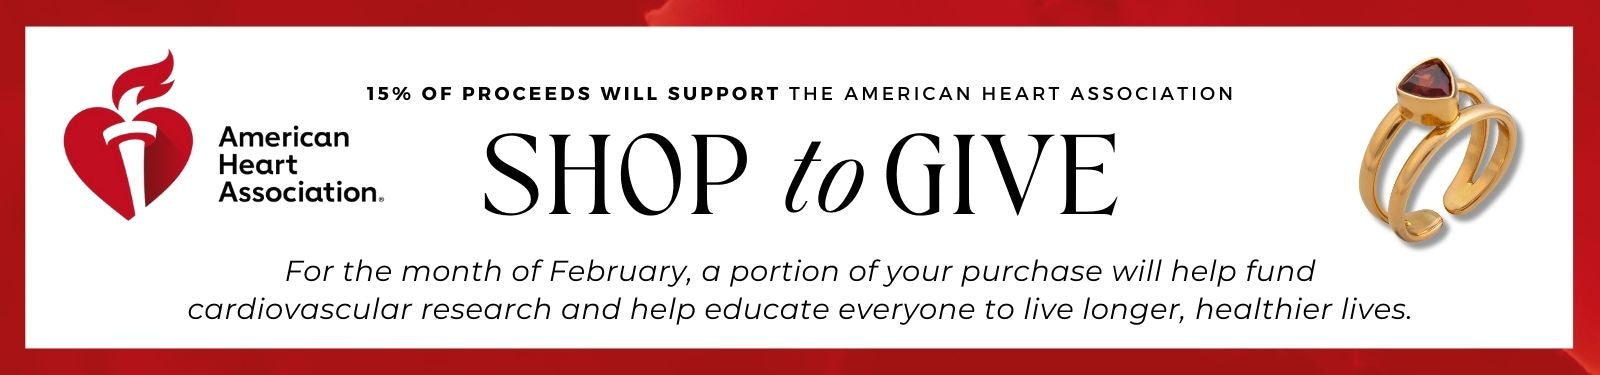 Shop to Give to the American Heart Association. For the month of February, a portion of your purchase will help fund cardiovascular research and help educate everyone to live longer, healthier lives.